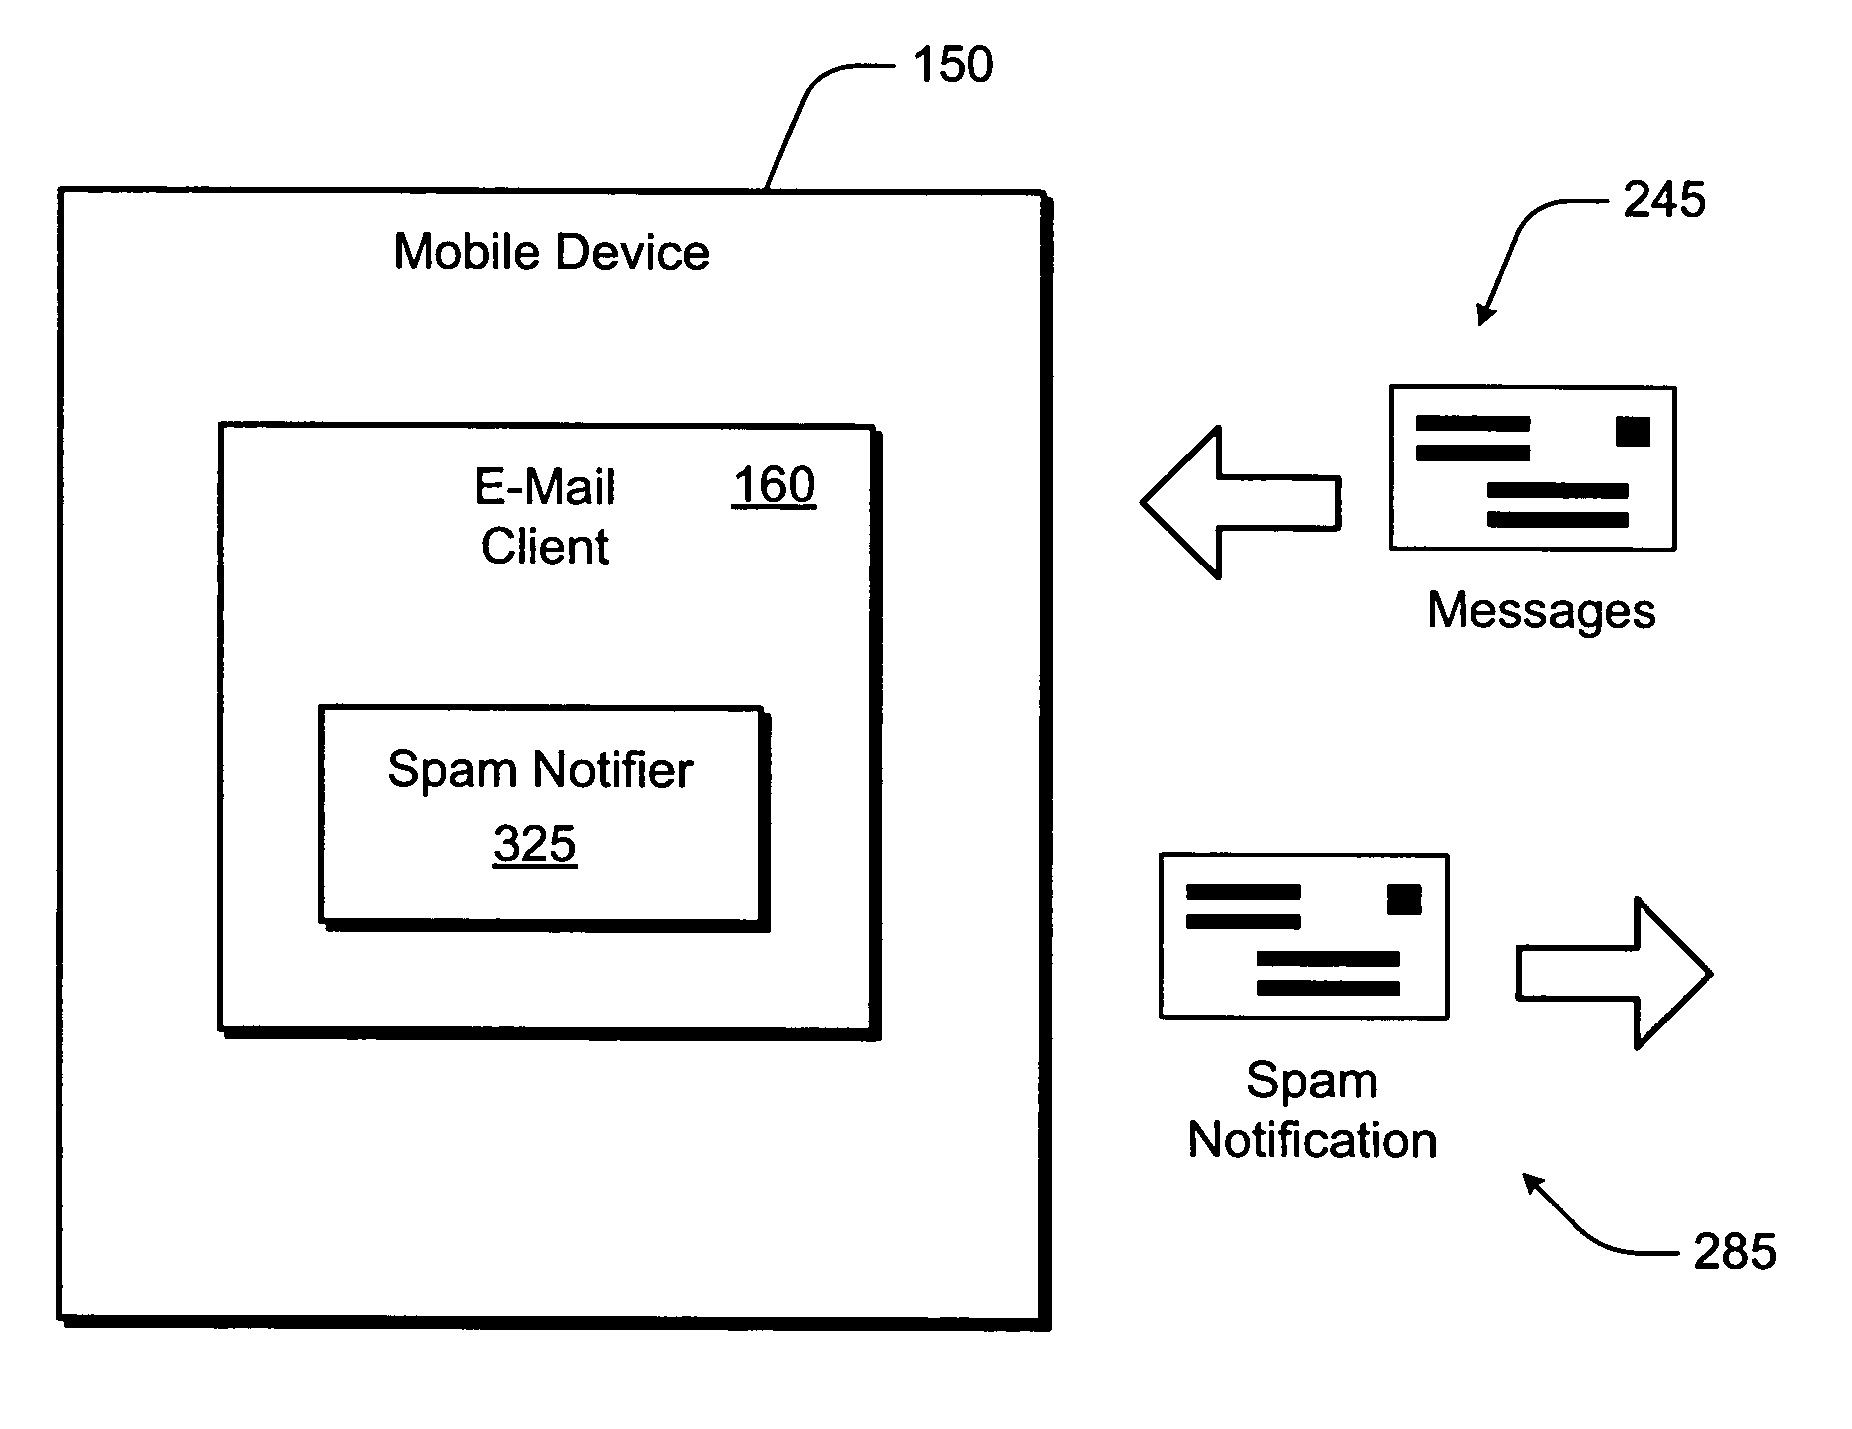 Communicating information about the content of electronic messages to a server